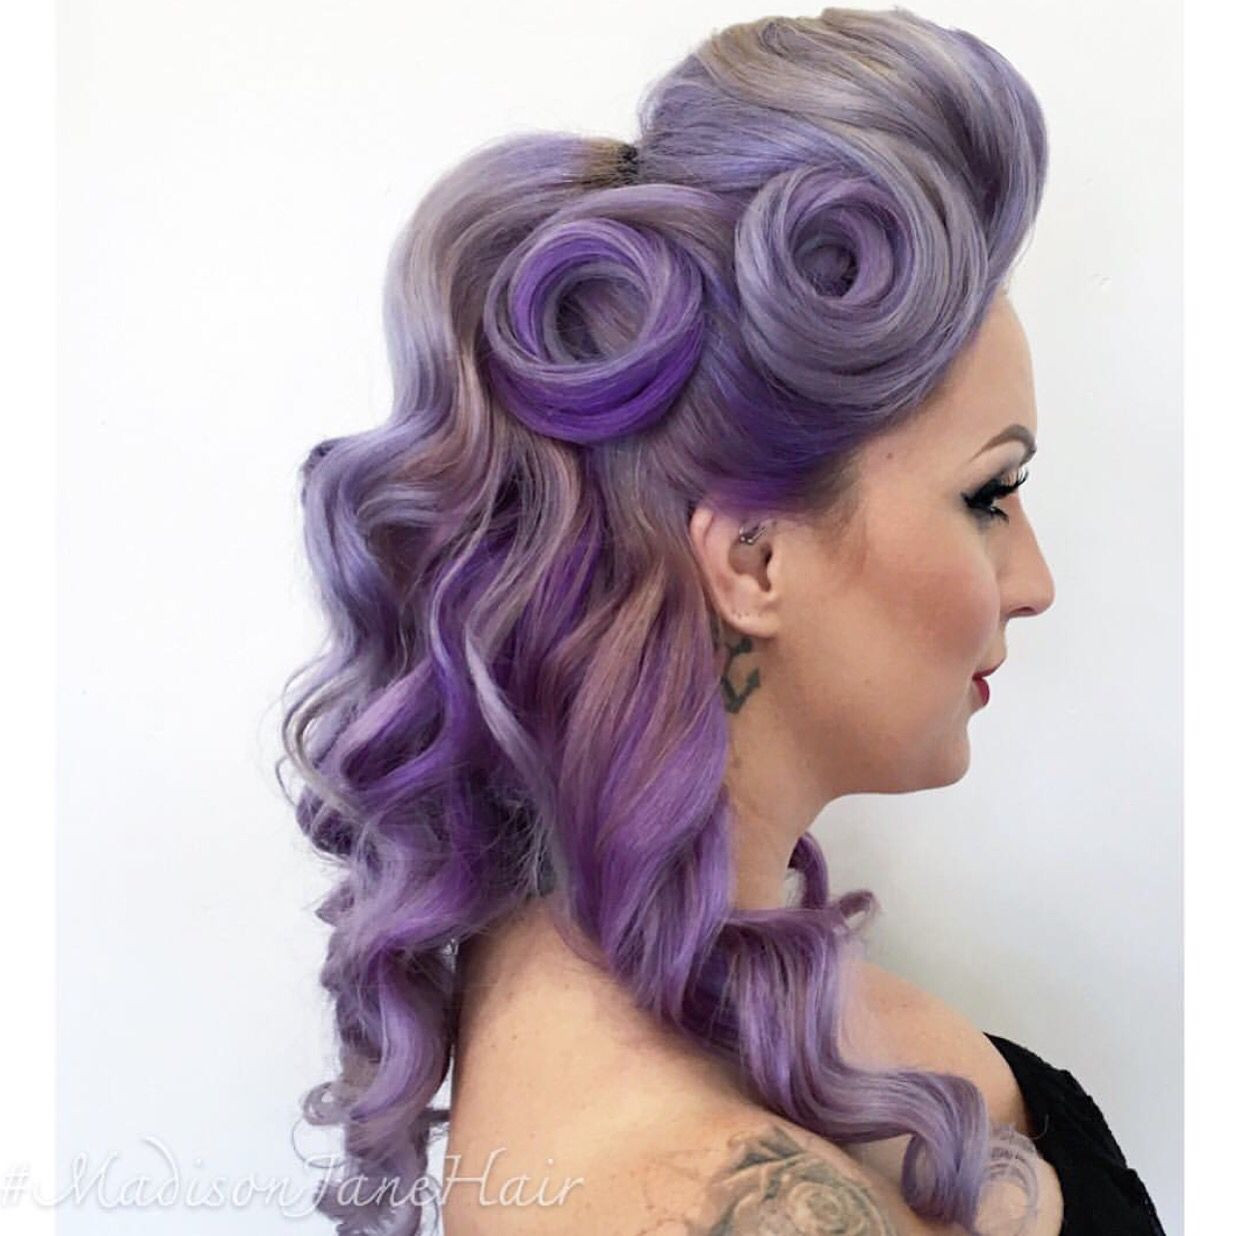 Pin Up Girl Wedding Hairstyles
 Pin on Oh girl that hair